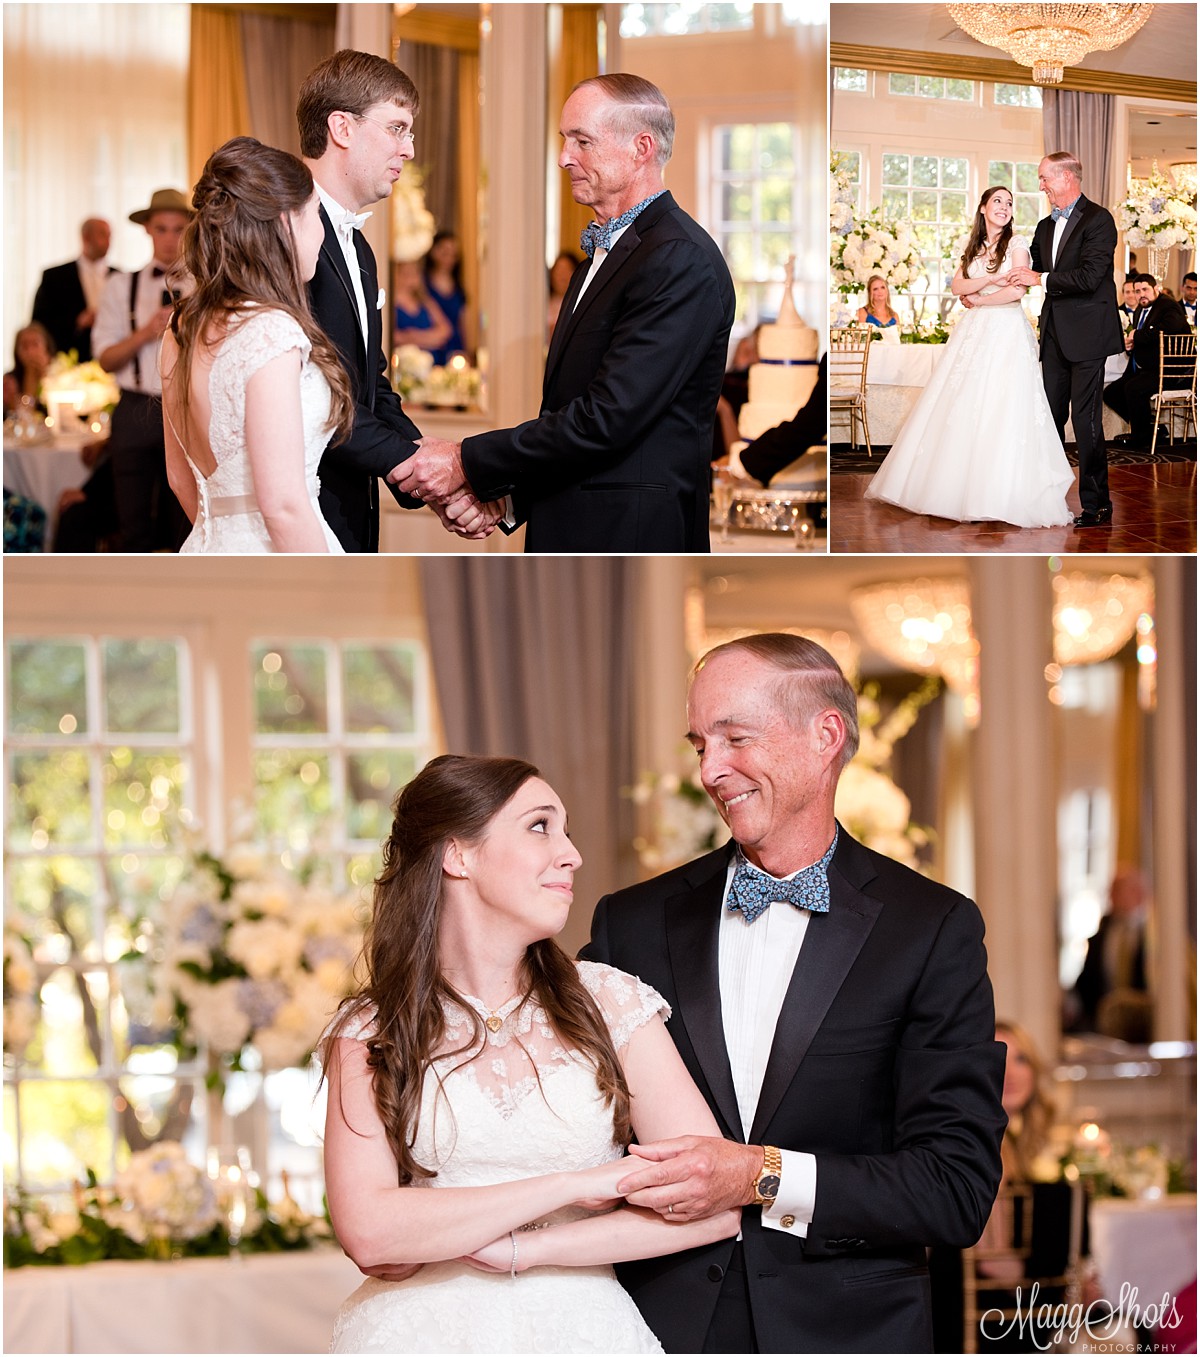 MaggShots Photography MaggShots Professional Photography Destination Photographer Father Daughter Dance Love